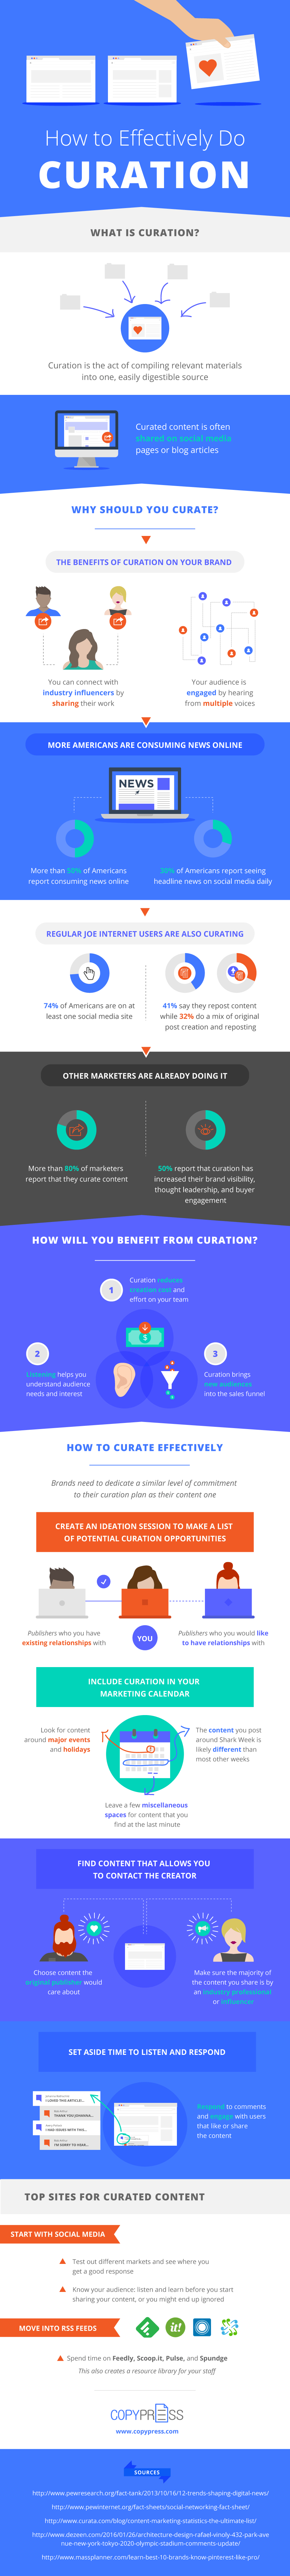 How to Do Curation Effectively - #infographic